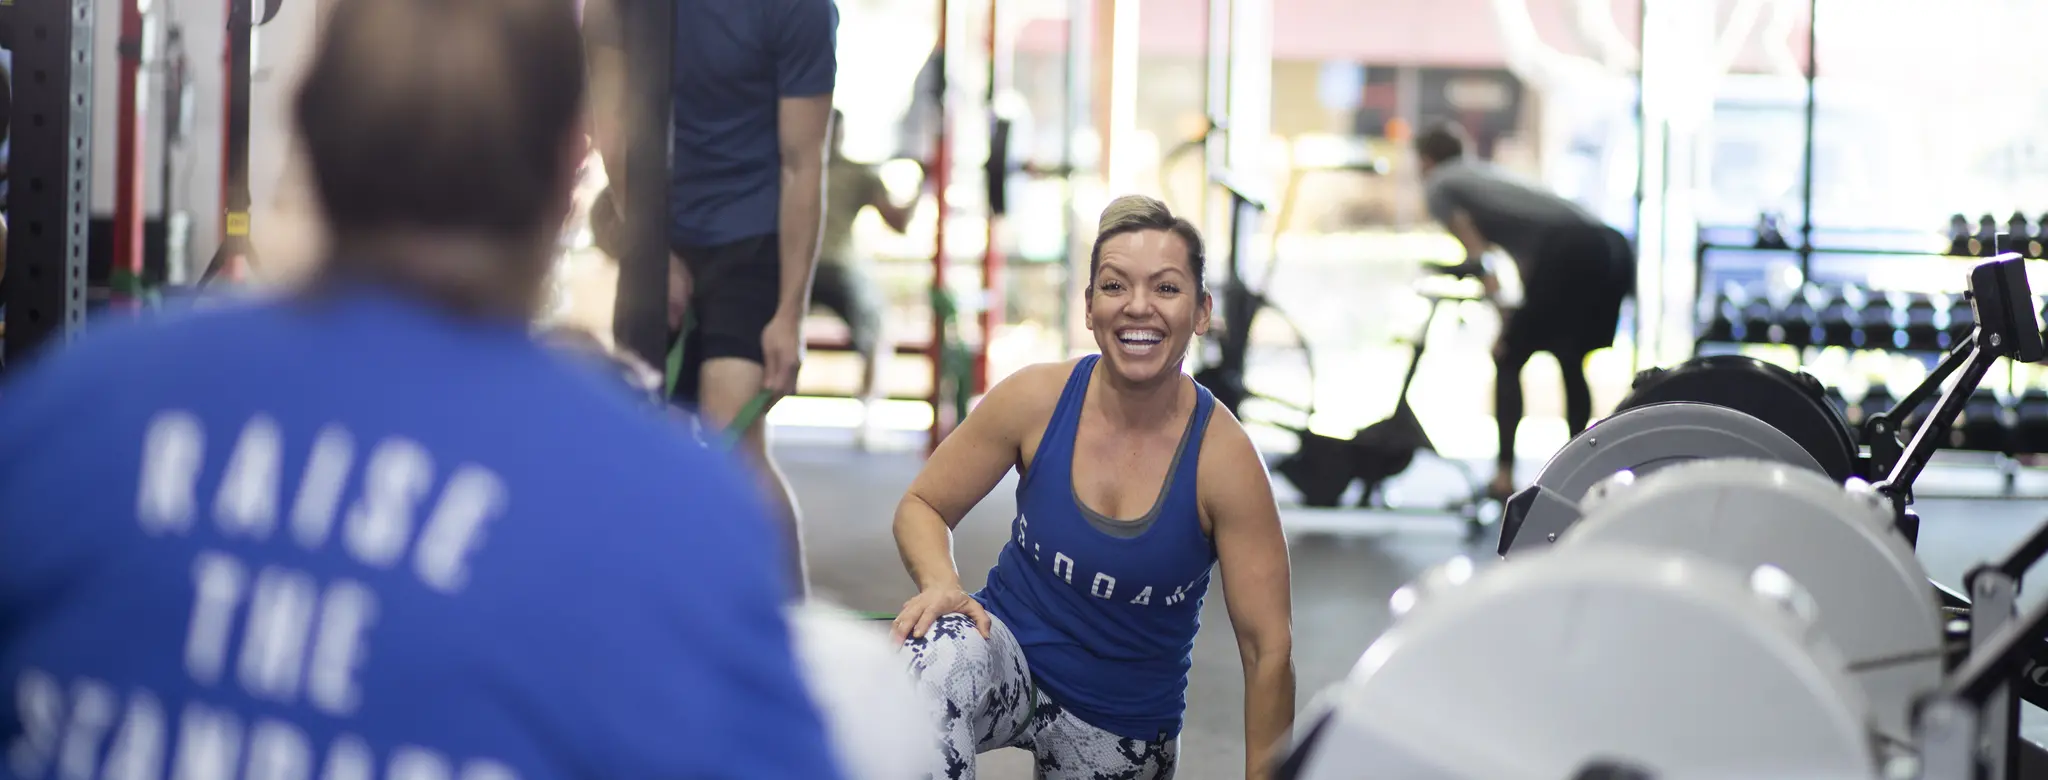 Client smiling in fitness business